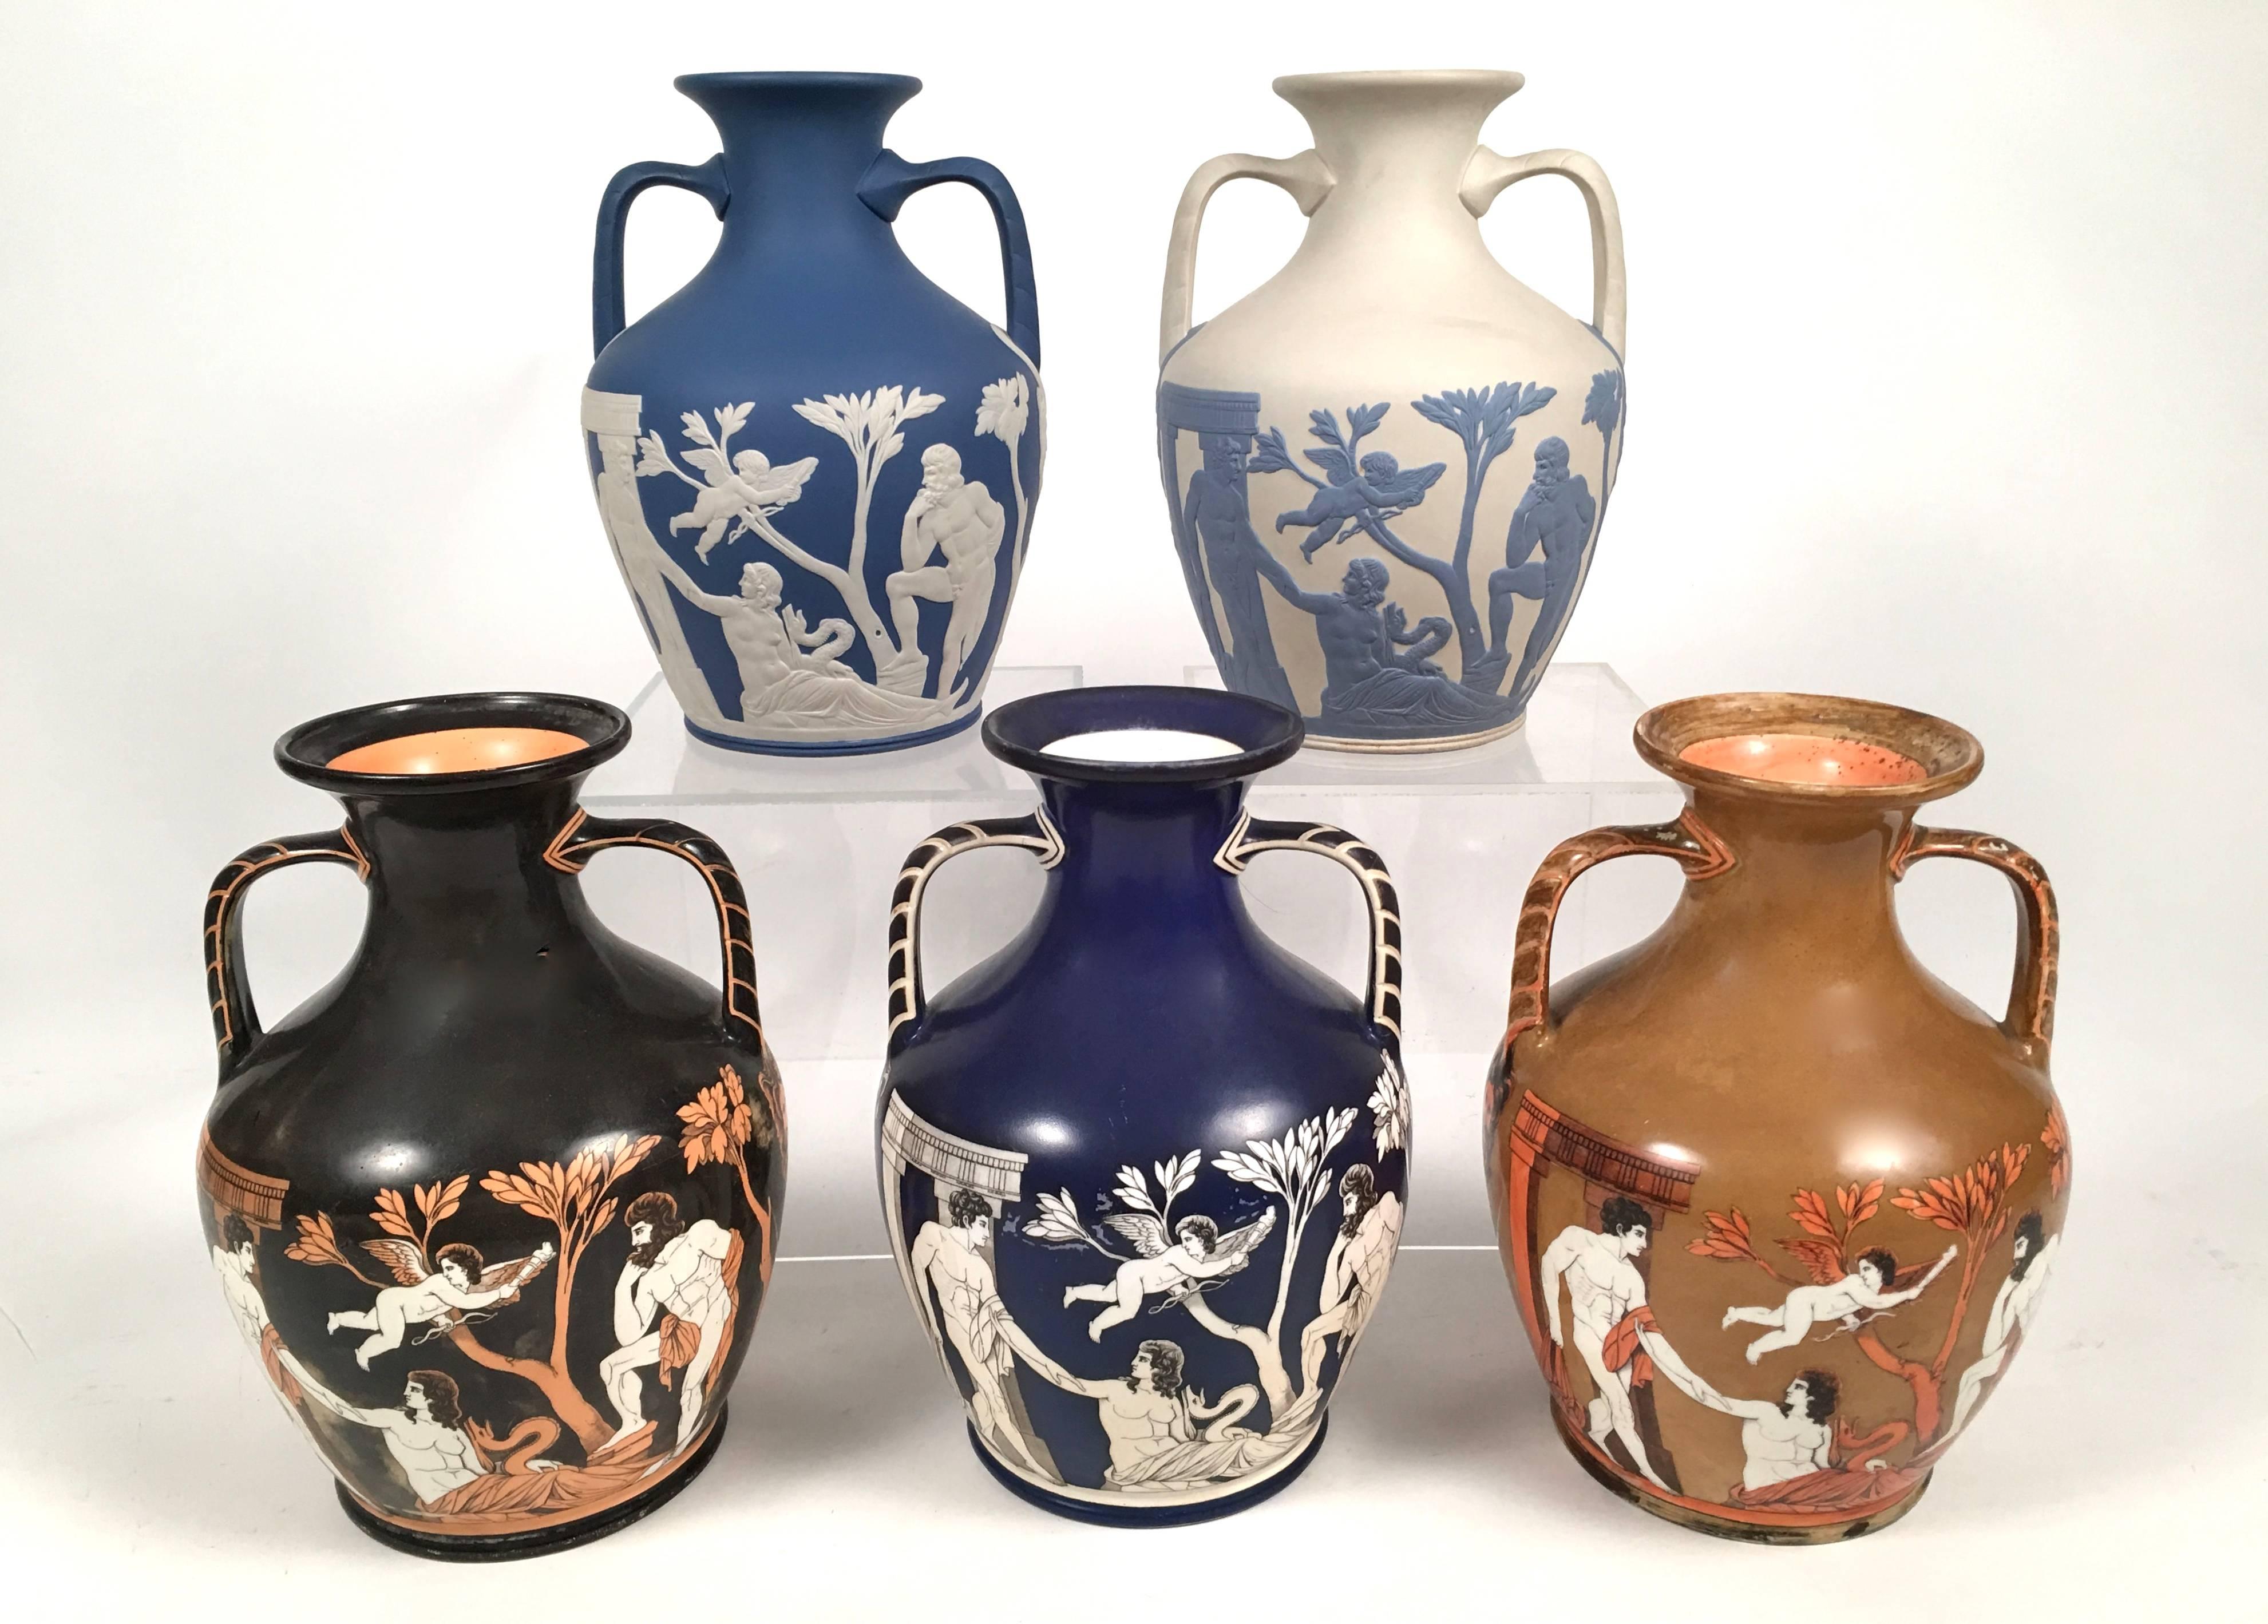 A rare collection of five versions of the legendary Portland vase--one of the most famous glass masterpieces from Roman Antiquity, and a source of inspiration to glass and porcelain makers for centuries--comprising two 20th century examples in